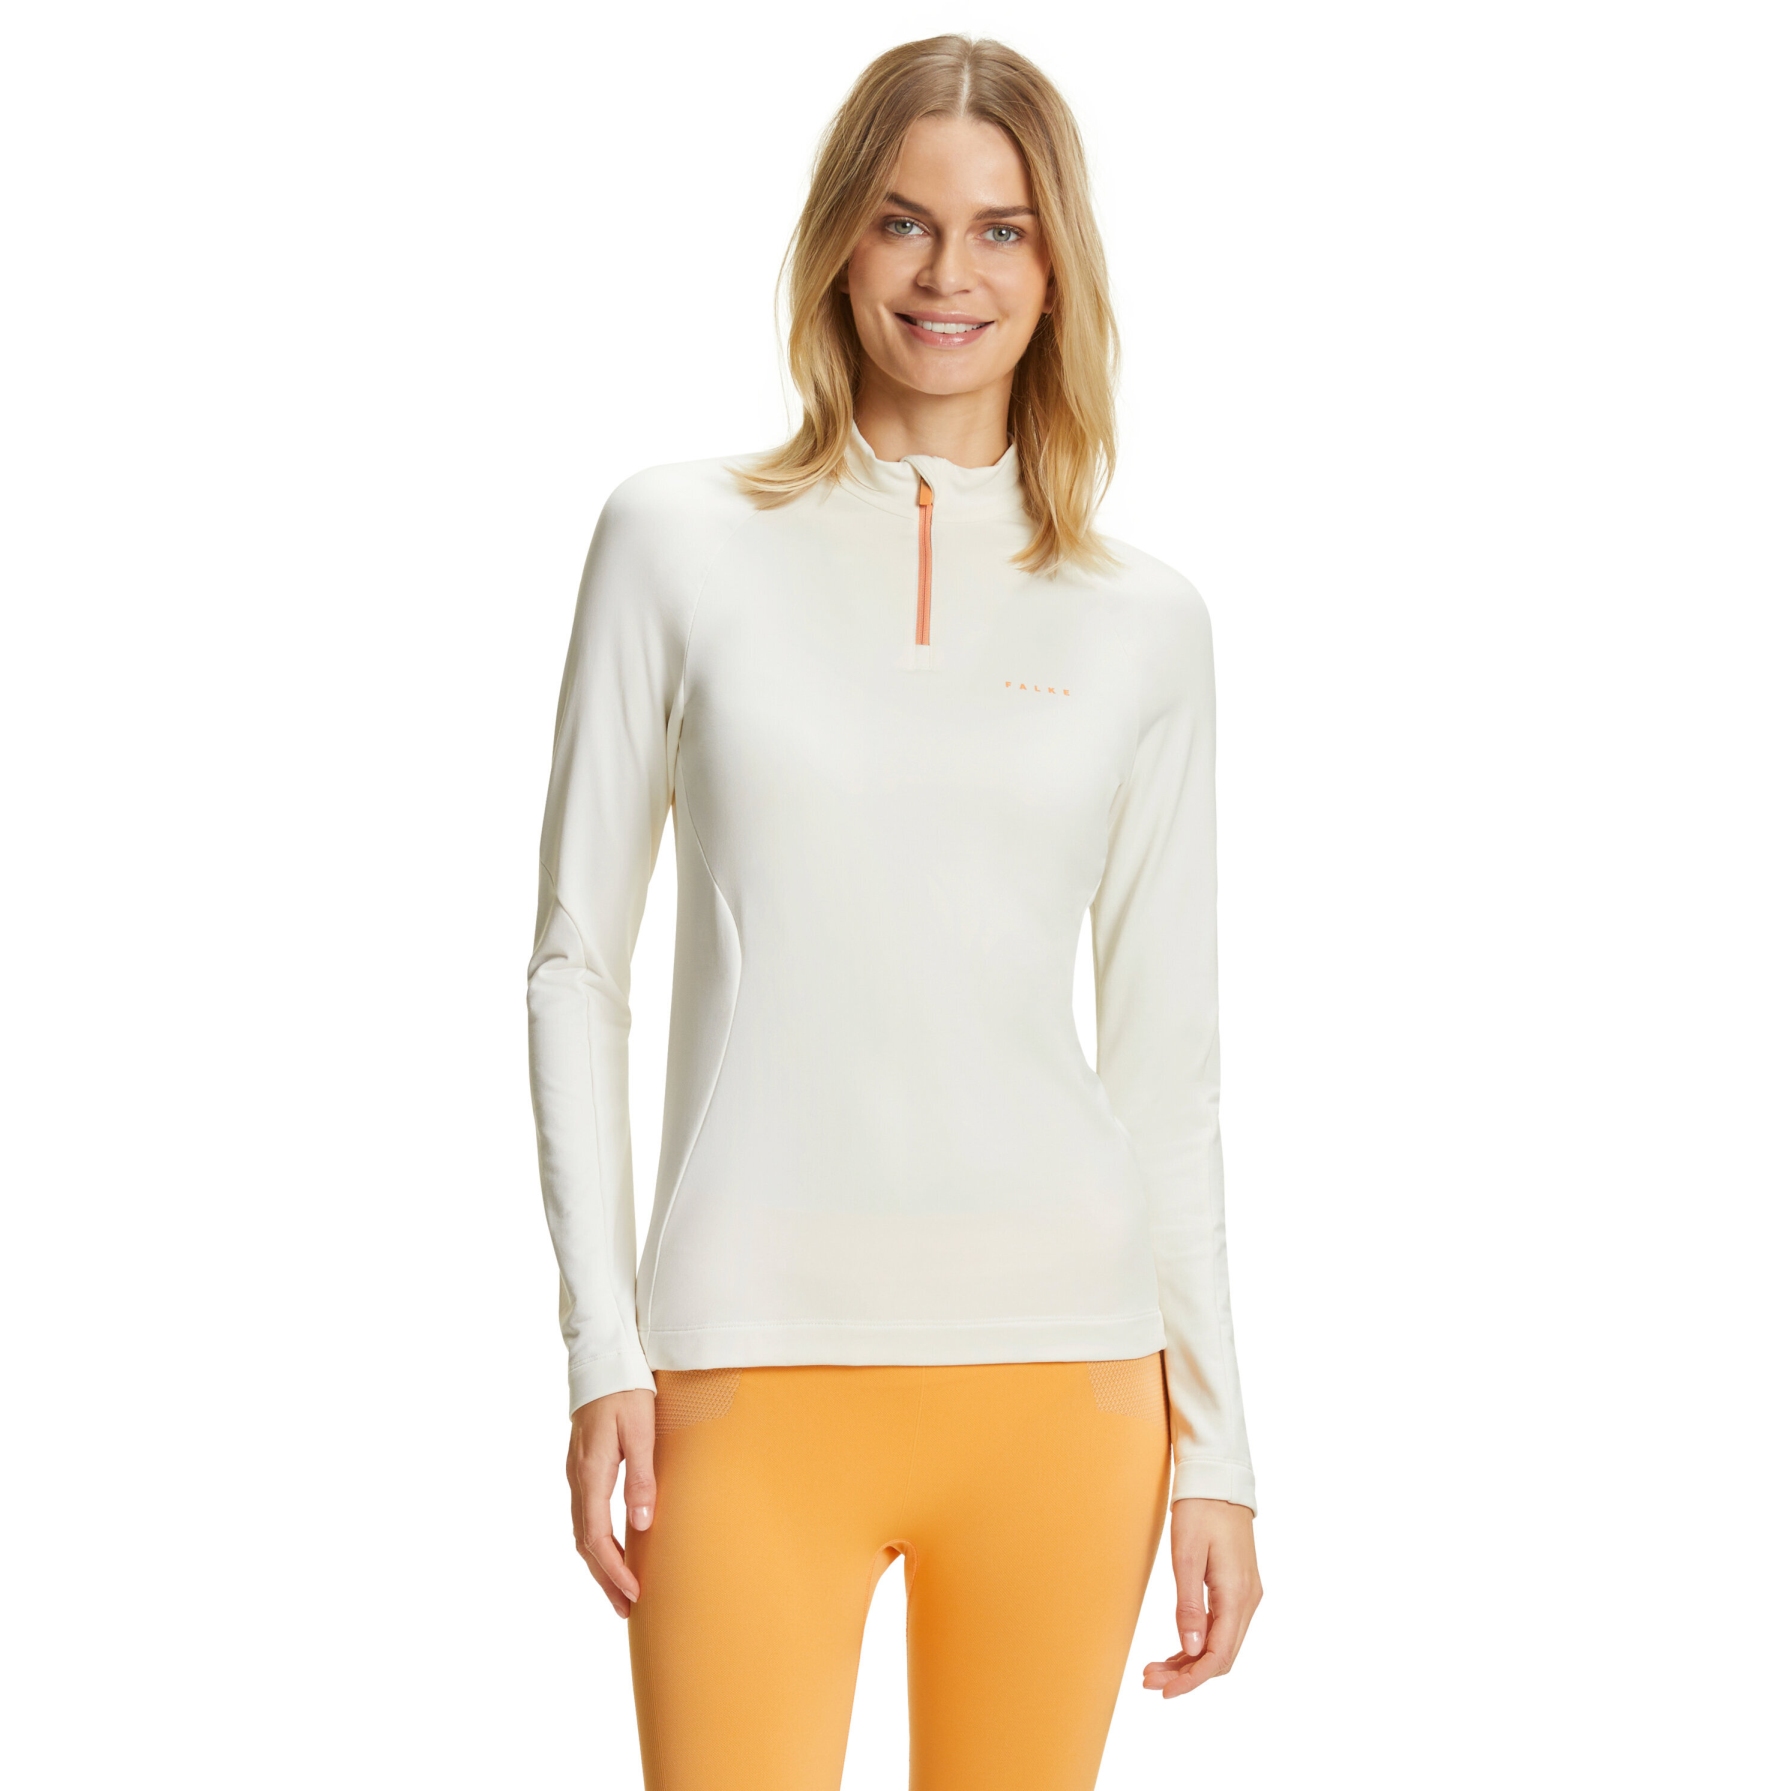 Picture of Falke SK Thermallayer Longsleeve Shirt Women - off-white 2040 (37558)